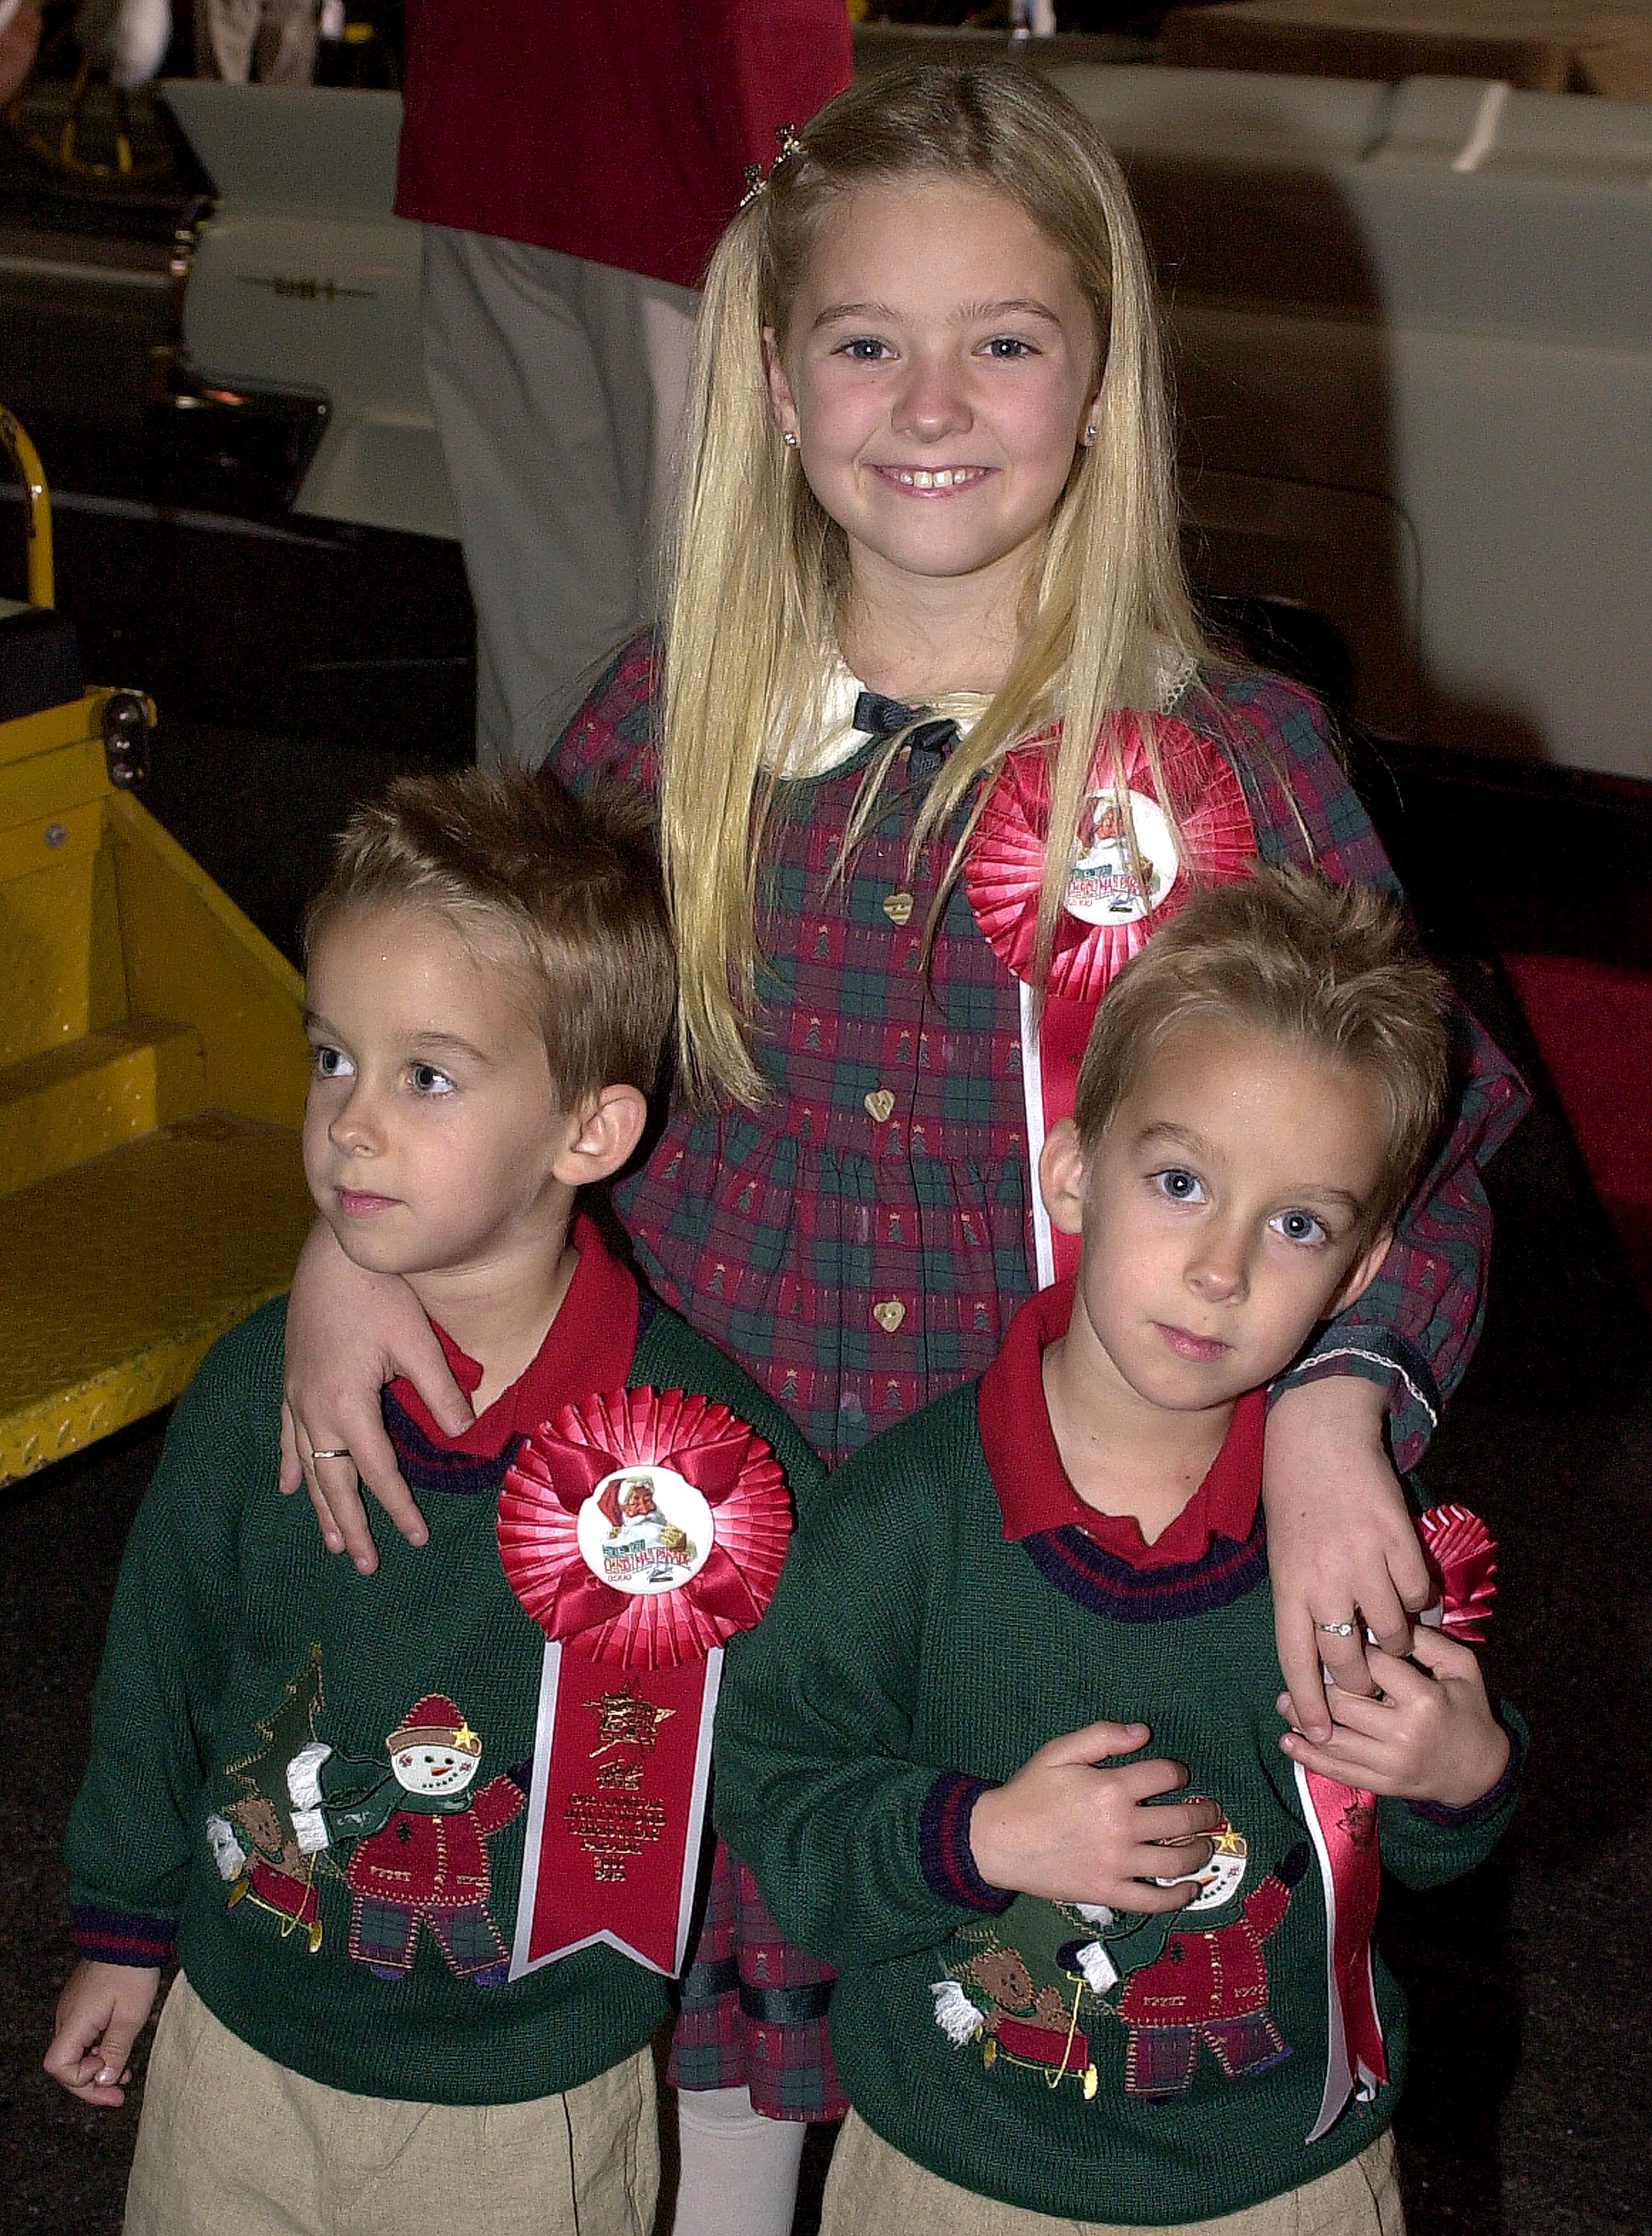 "Everybody Loves Raymond" cast members Madylin, Sawyer, and Sullivan Sweeten arrive at the Hollywood Christmas Parade, November 26, 2000 in Hollywood, CA. | Source: Getty Images